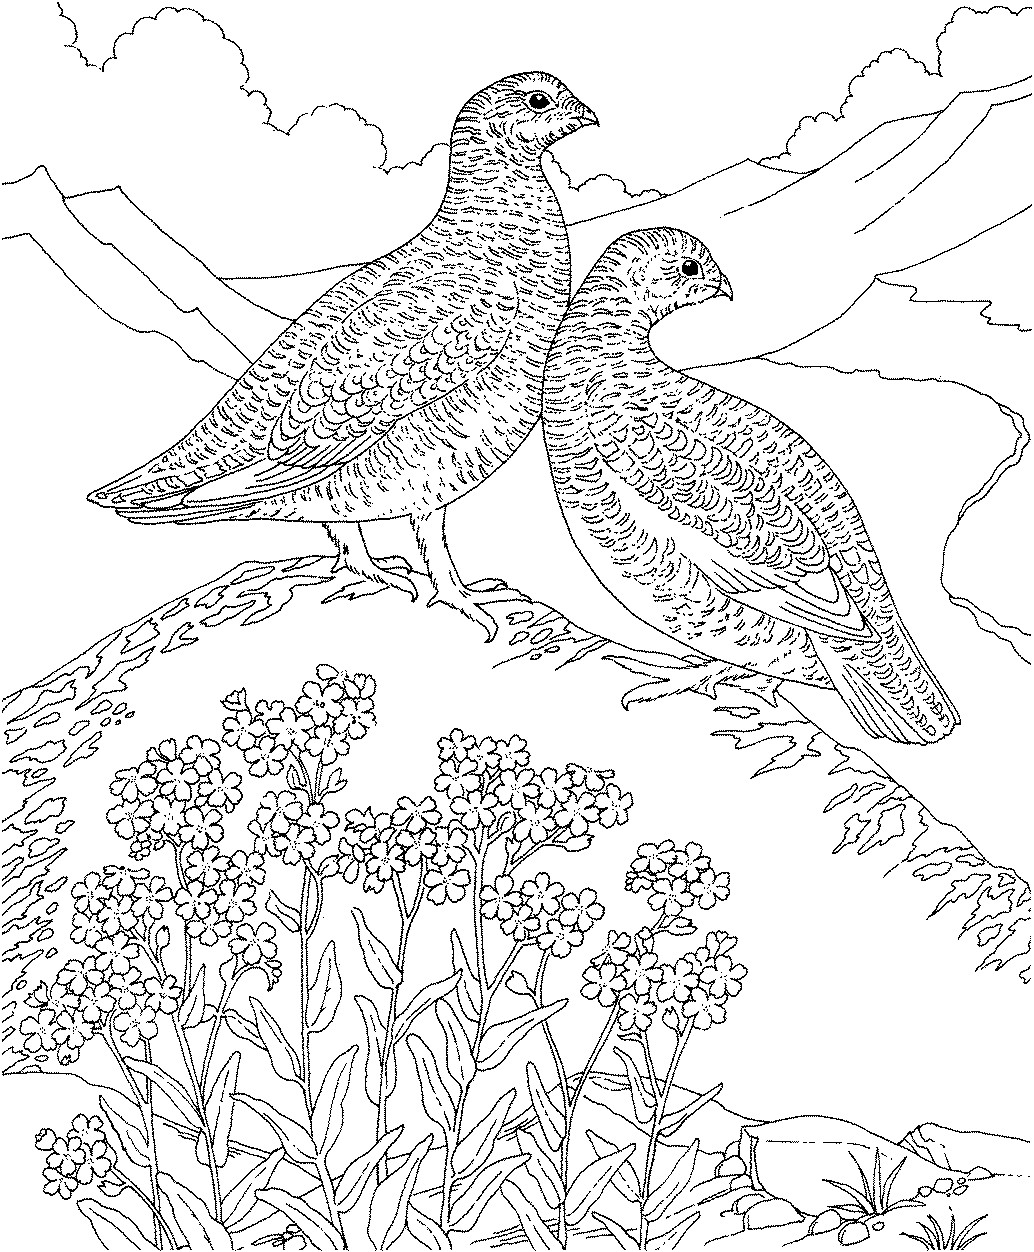 Willon Coloring Pages For Boys
 Free Printable Coloring Page Alaska State Bird and